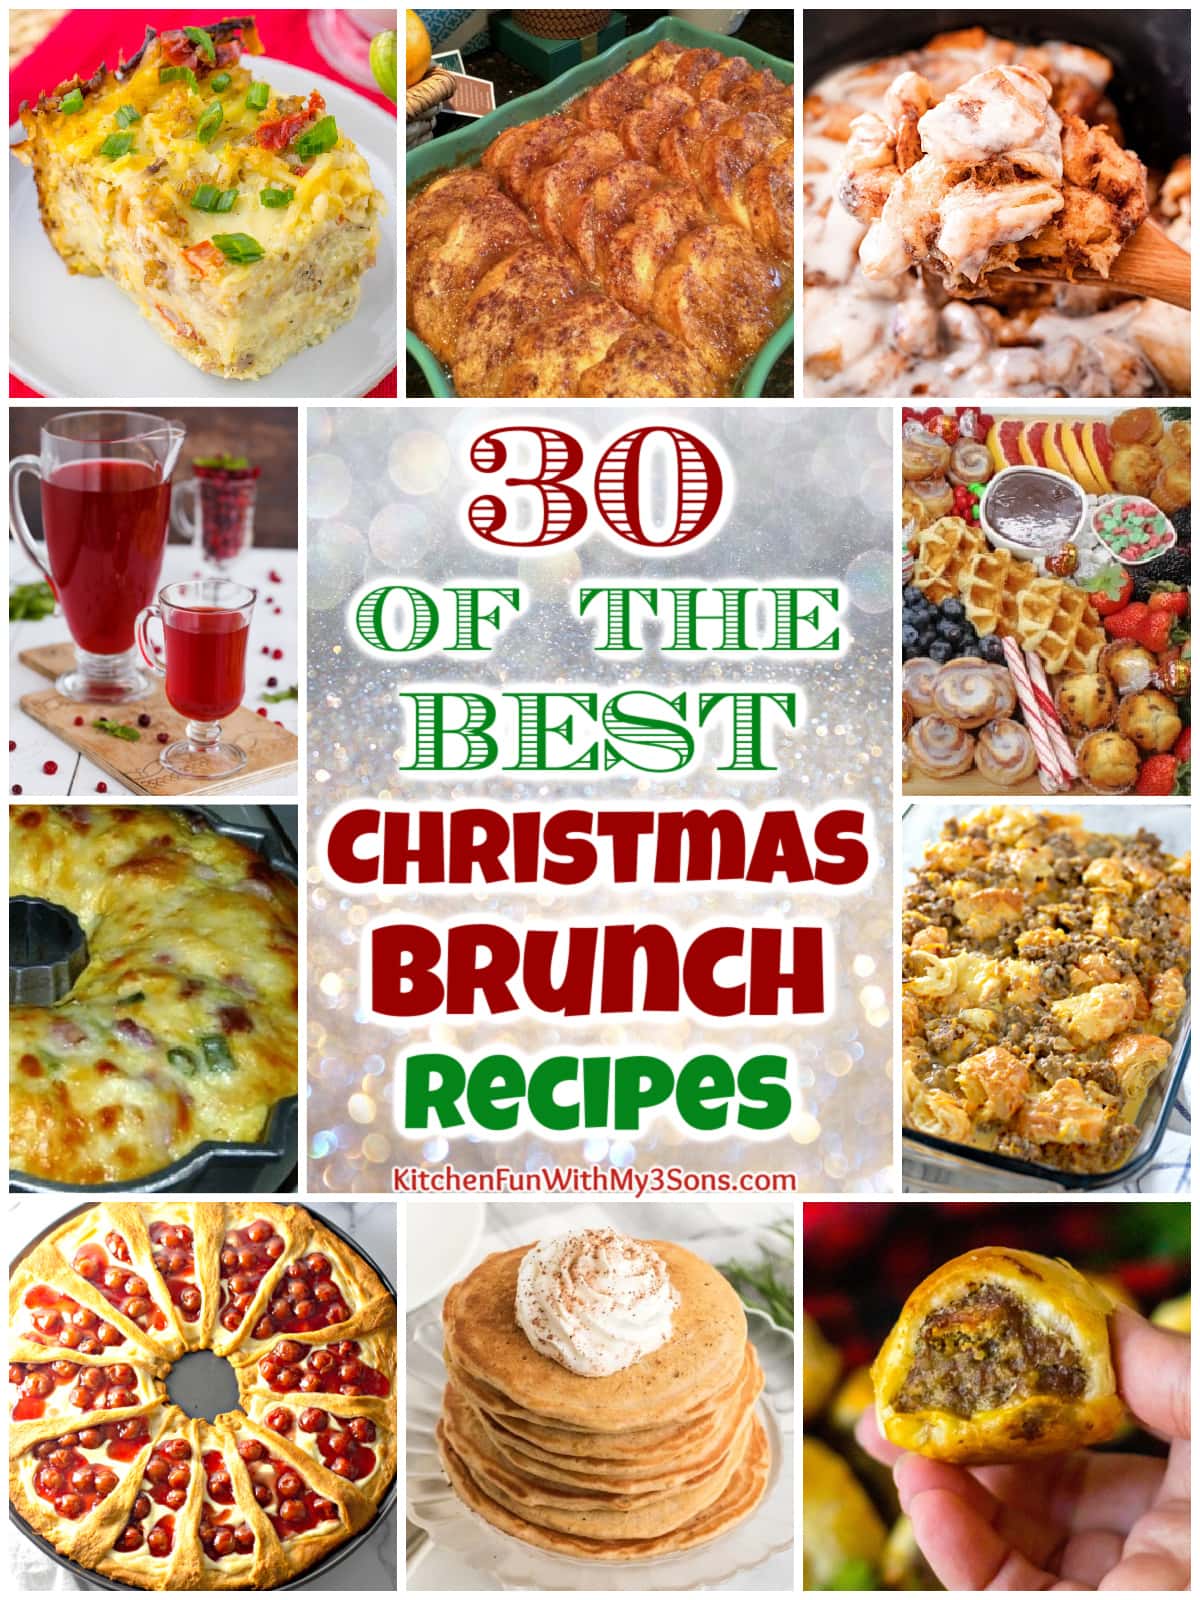 30 of the BEST Christmas Brunch Recipes pin